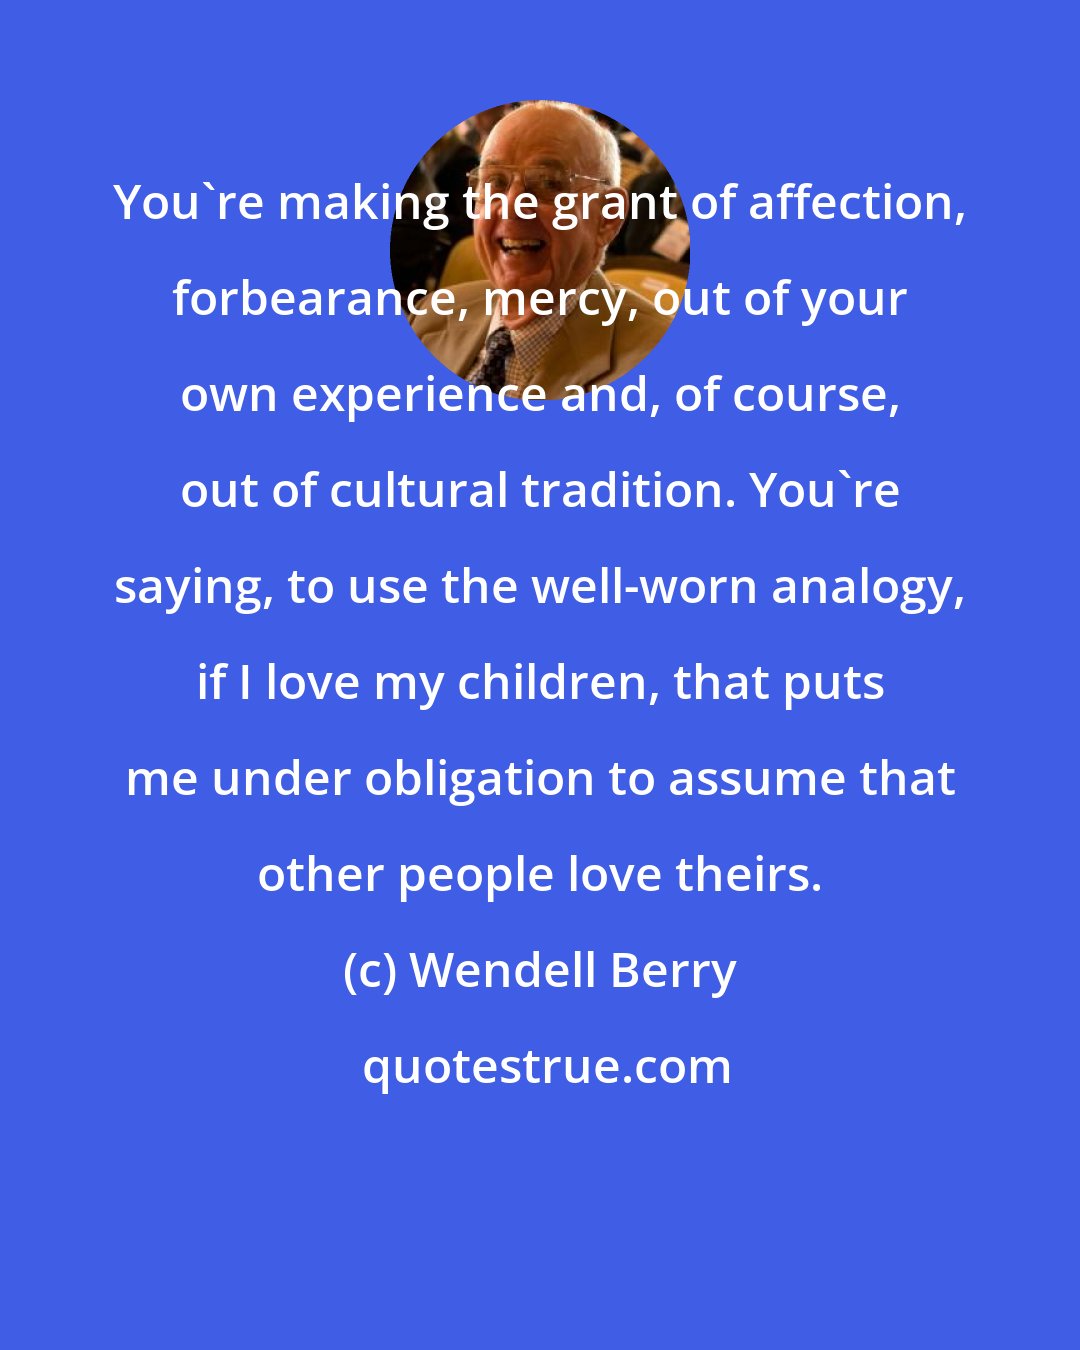 Wendell Berry: You're making the grant of affection, forbearance, mercy, out of your own experience and, of course, out of cultural tradition. You're saying, to use the well-worn analogy, if I love my children, that puts me under obligation to assume that other people love theirs.